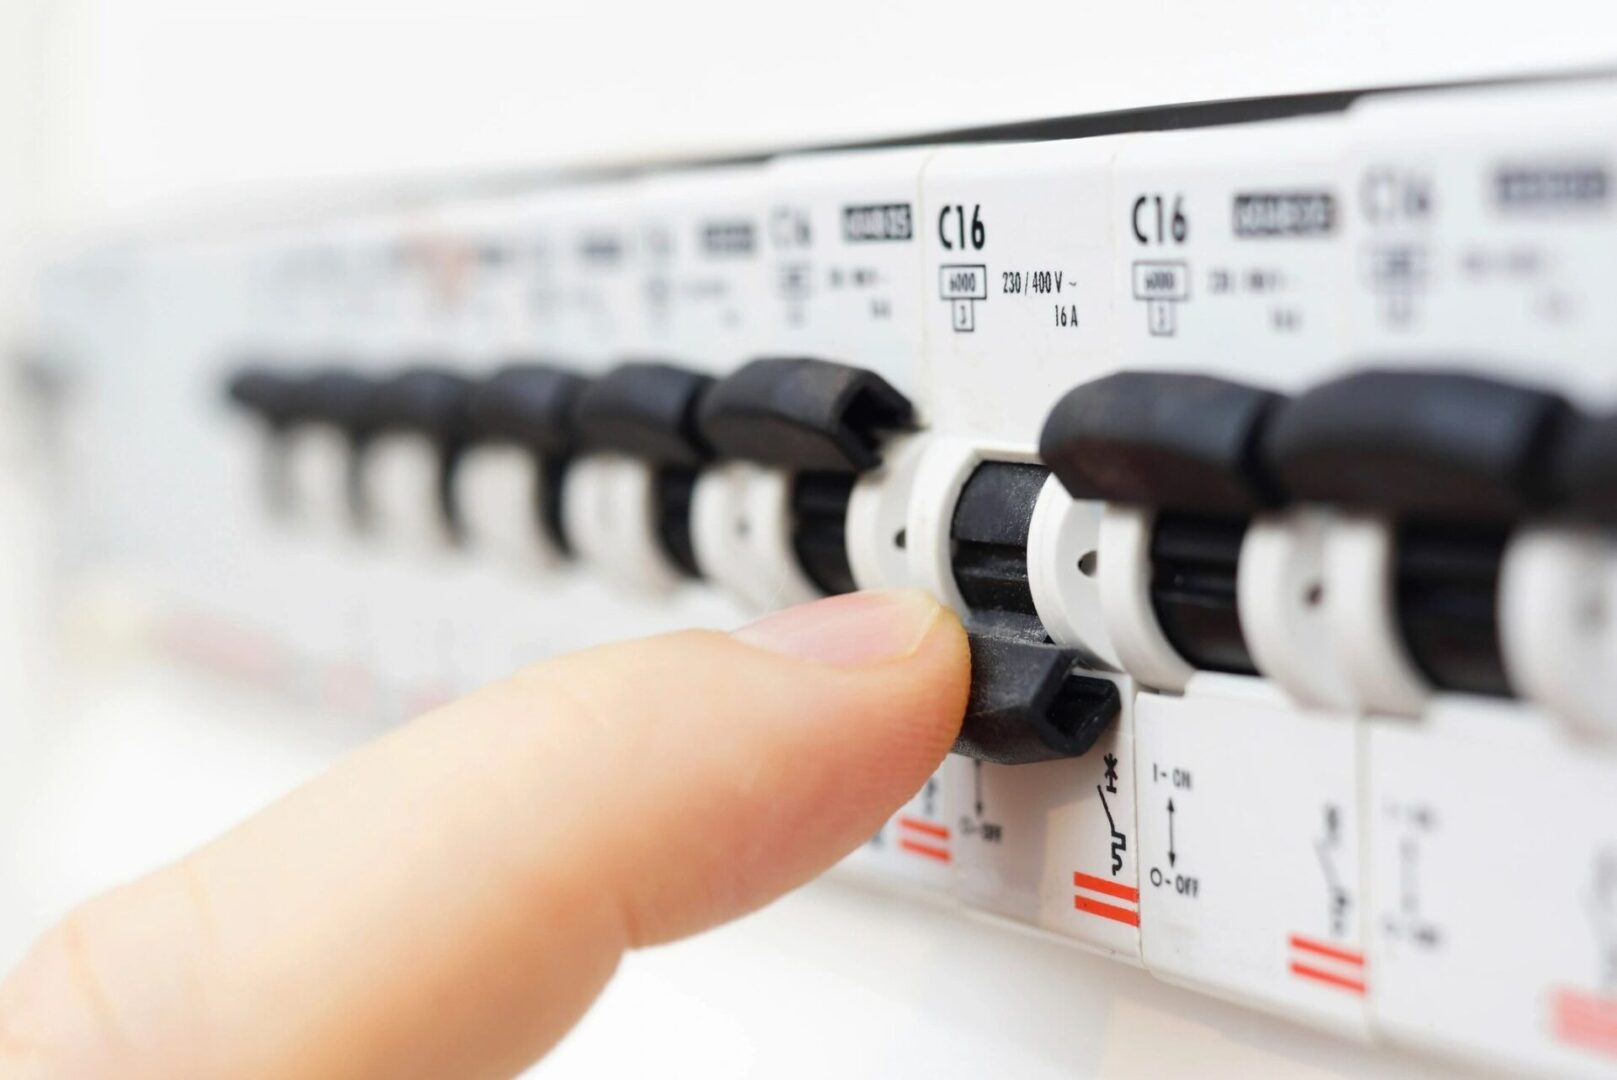 A hand is pressing the button on an electrical panel.